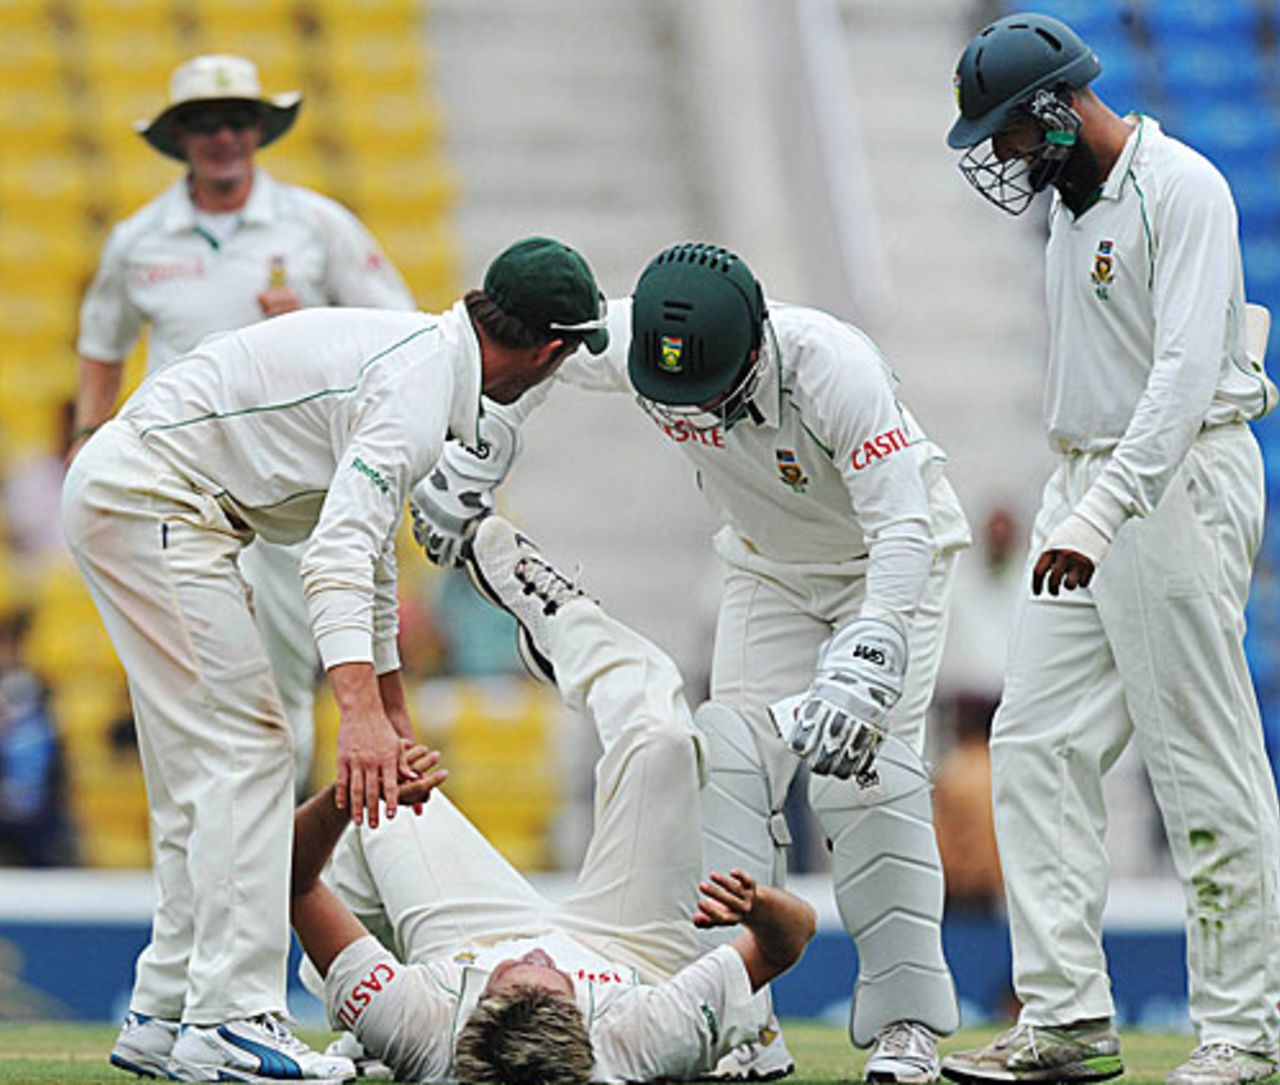 Paul Harris falls to the ground in relief after getting rid of Sachin Tendulkar, India v South Africa, 1st Test, Nagpur, 4th day, February 9, 2010